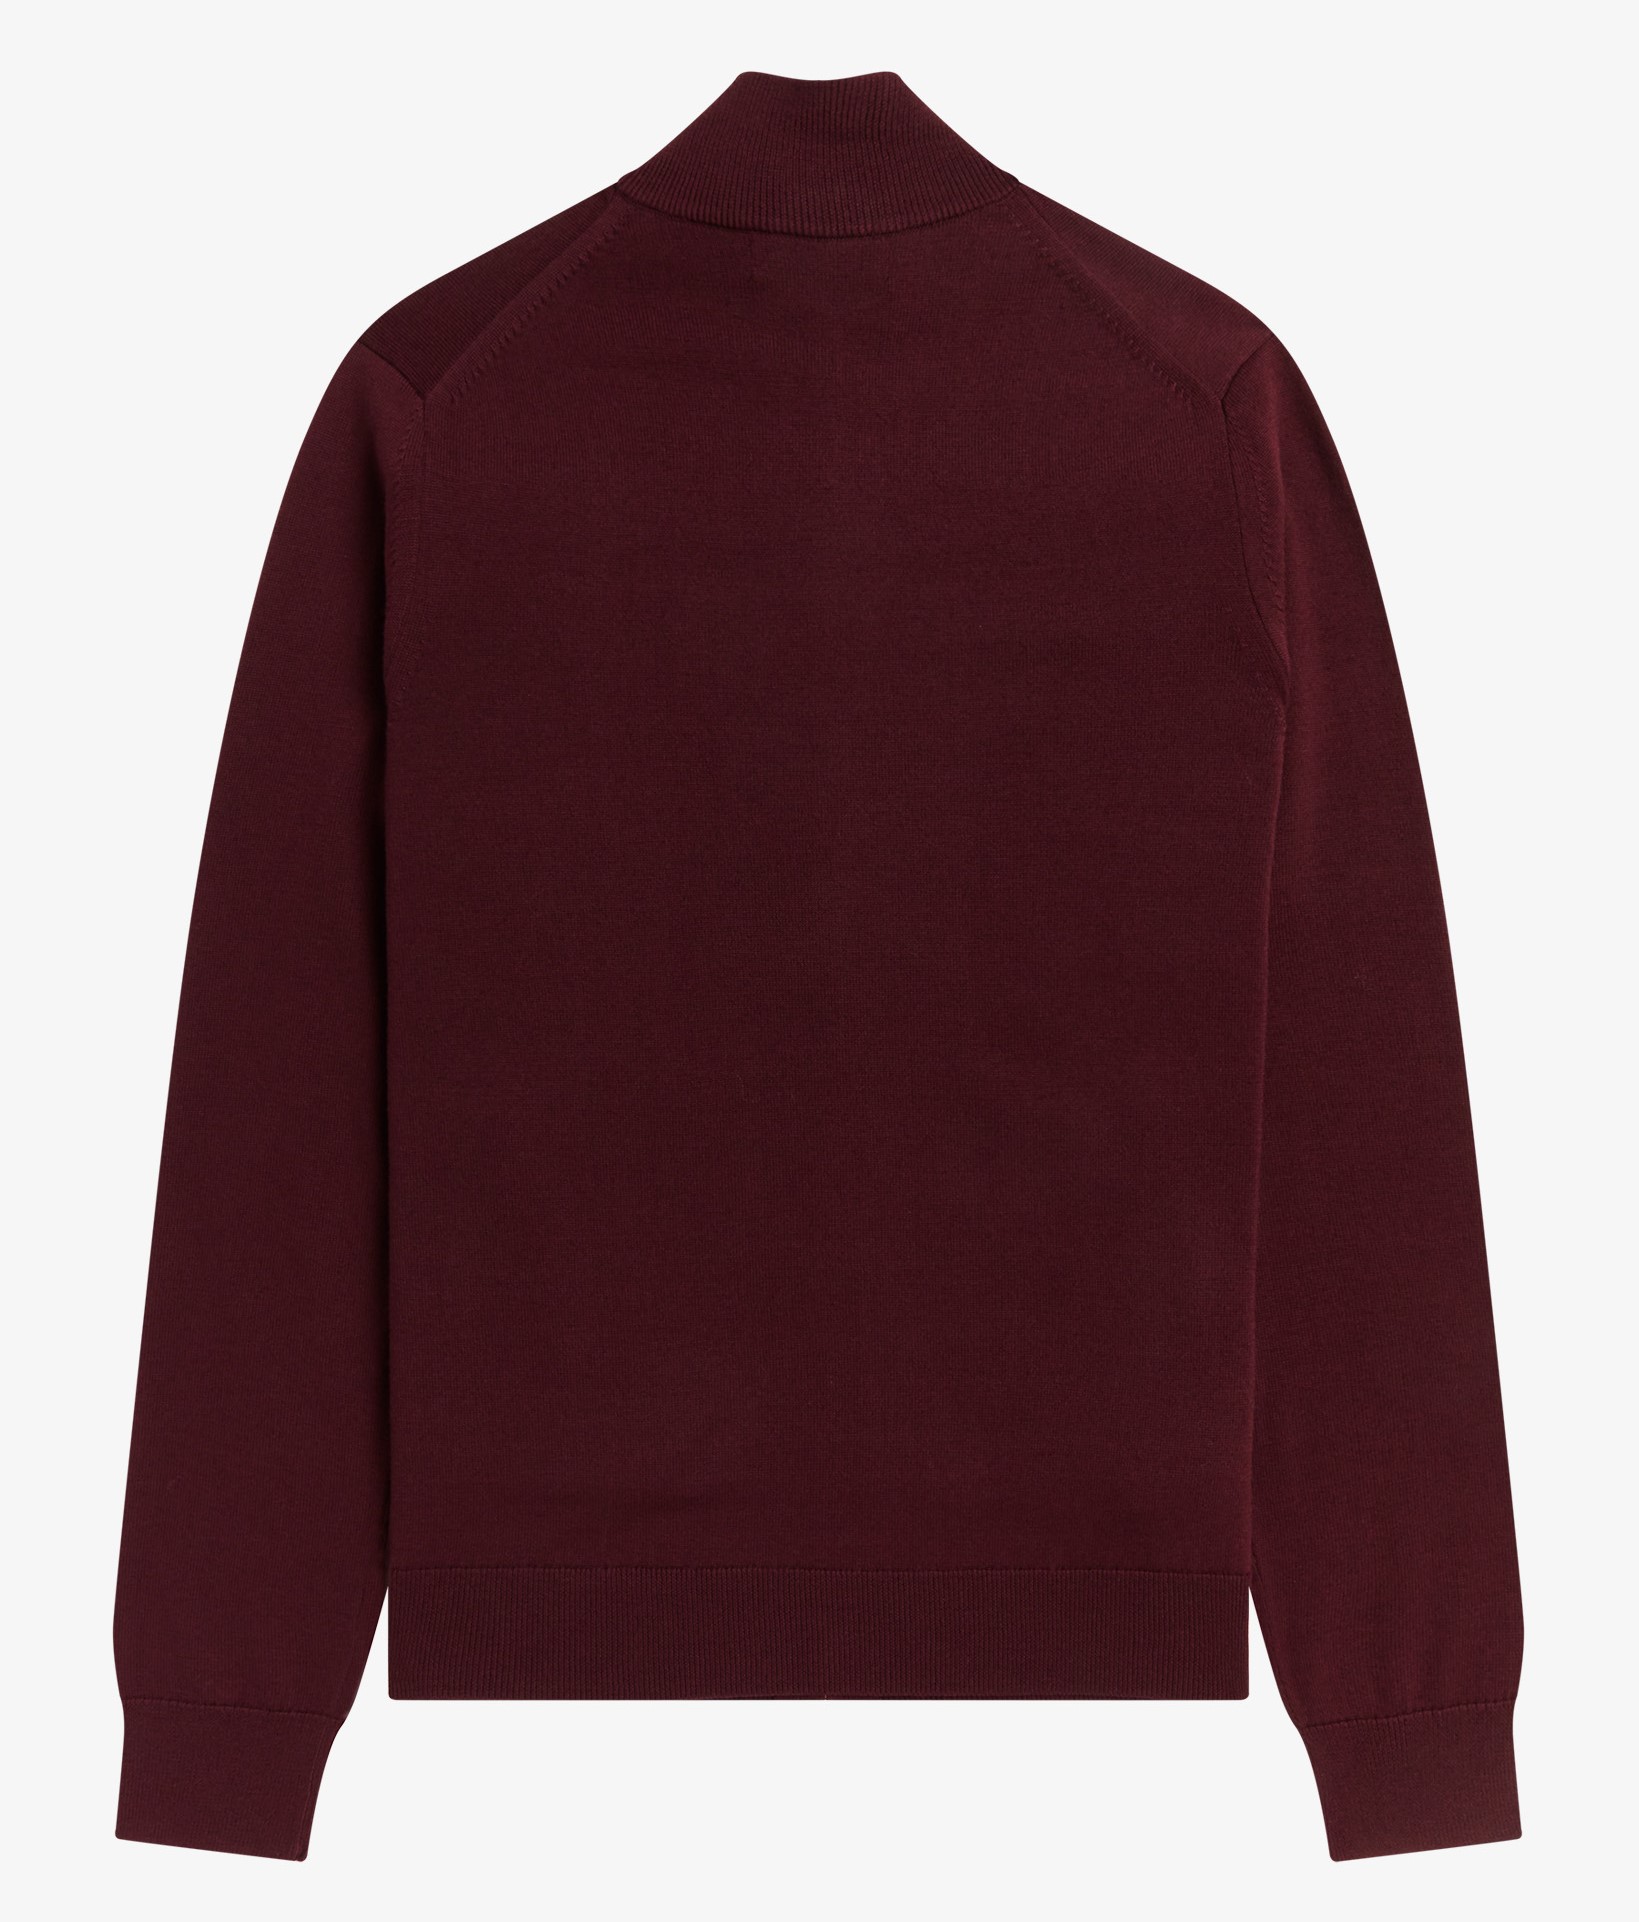 Fred Perry - CLASSIC ZIP TROUGH CARDIGAN - Oxblood 